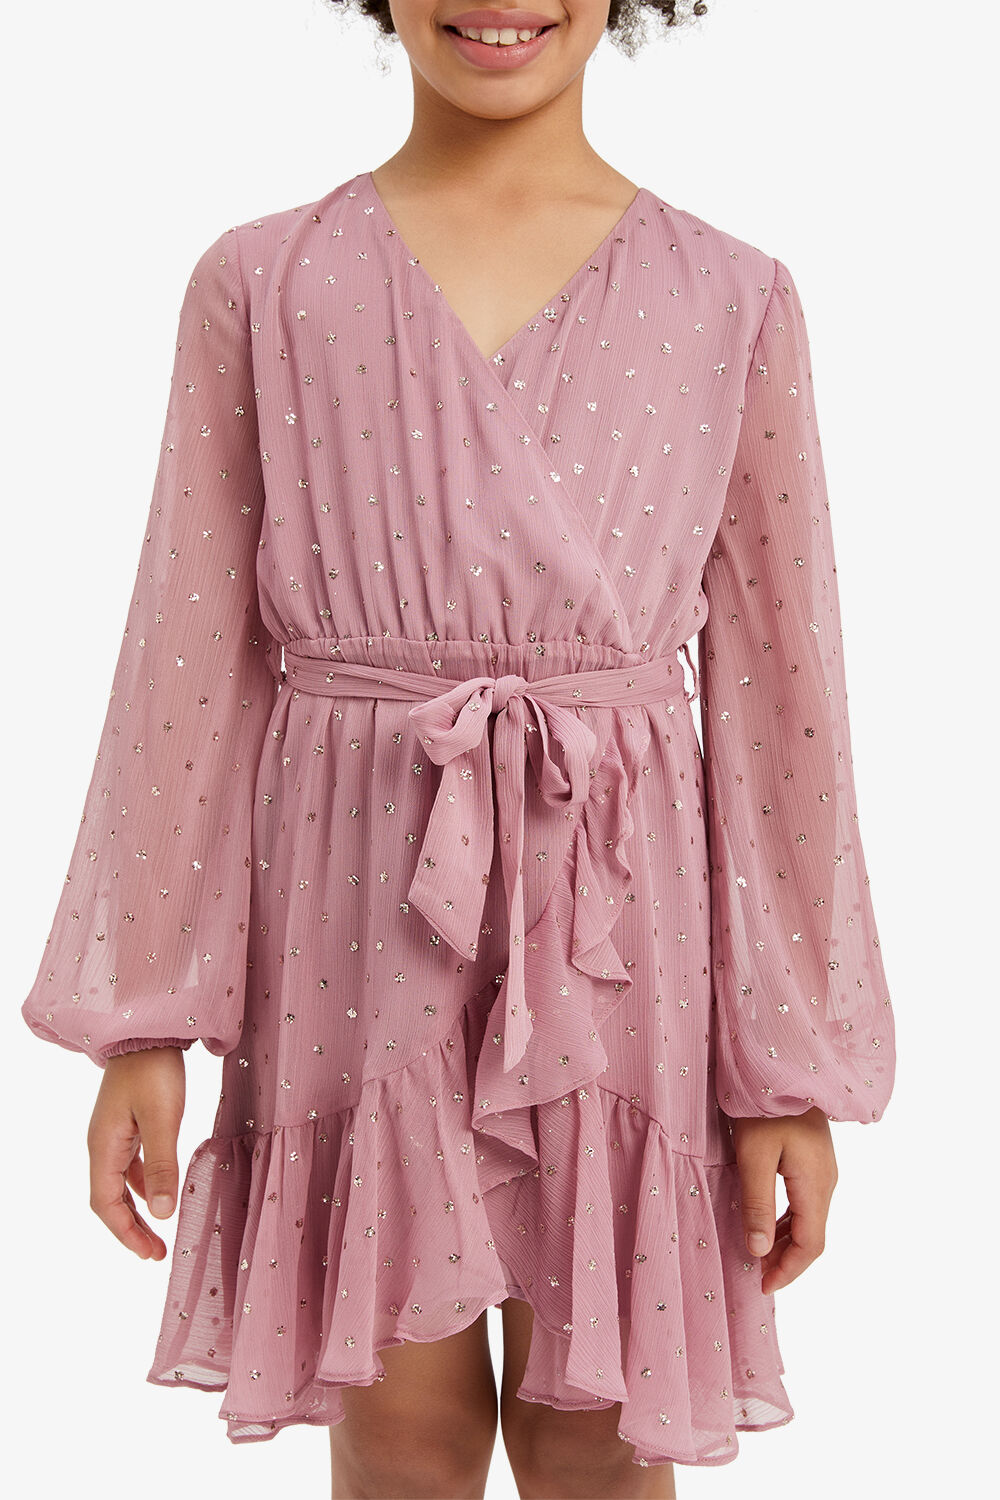 GIRLS CANDICE WRAP DRESS in colour SWEET LILAC